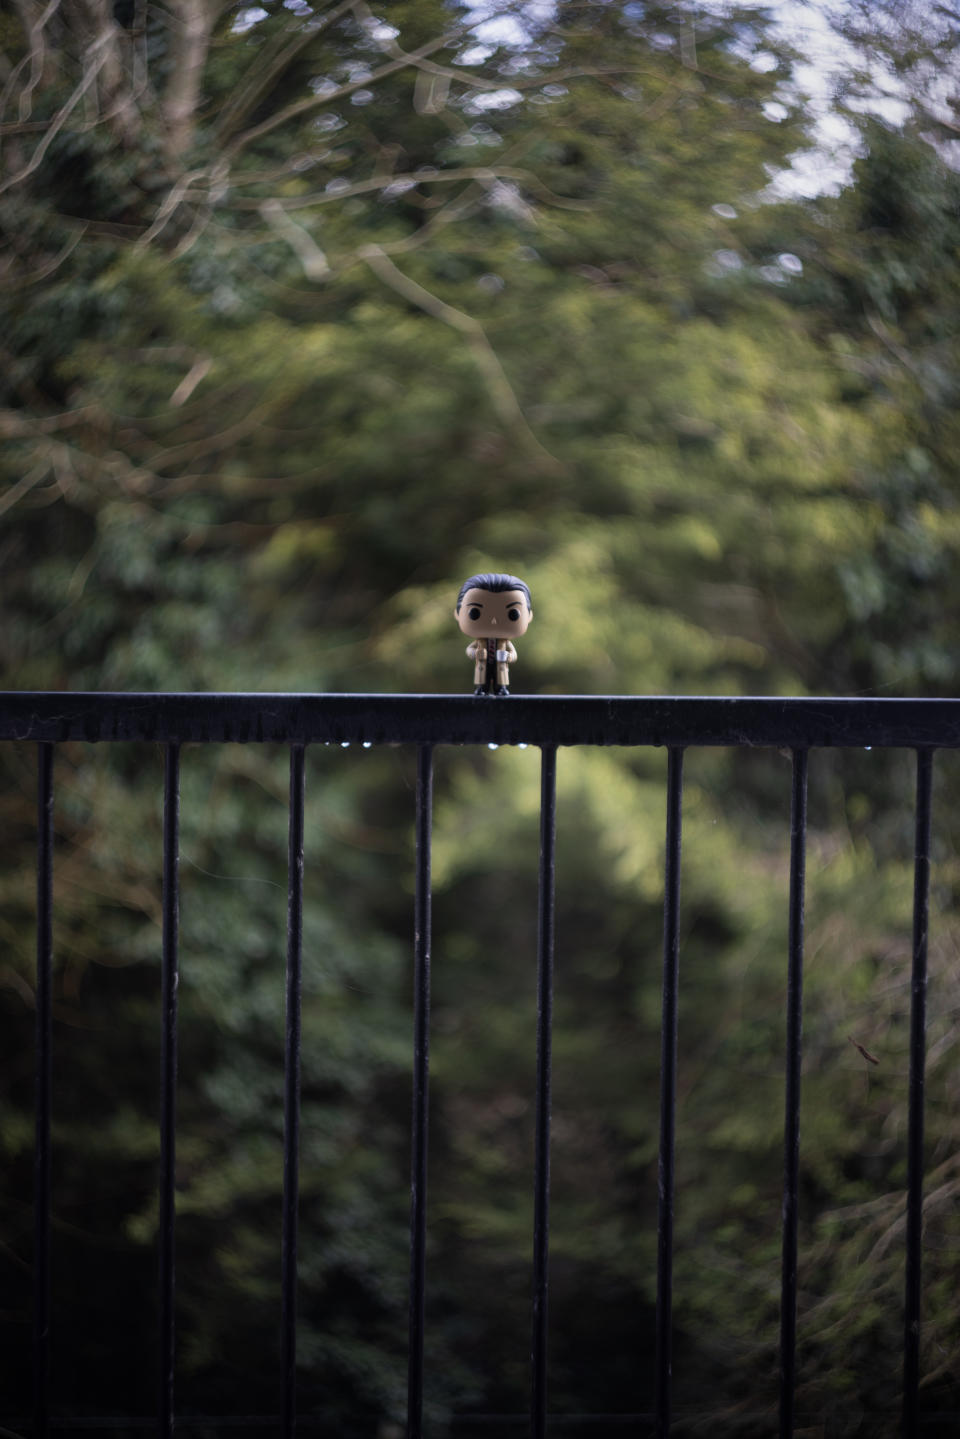 Helios 44-2 sample image, illustrating the swirly bokeh effect with a Pop! figure against a blurry woodland background